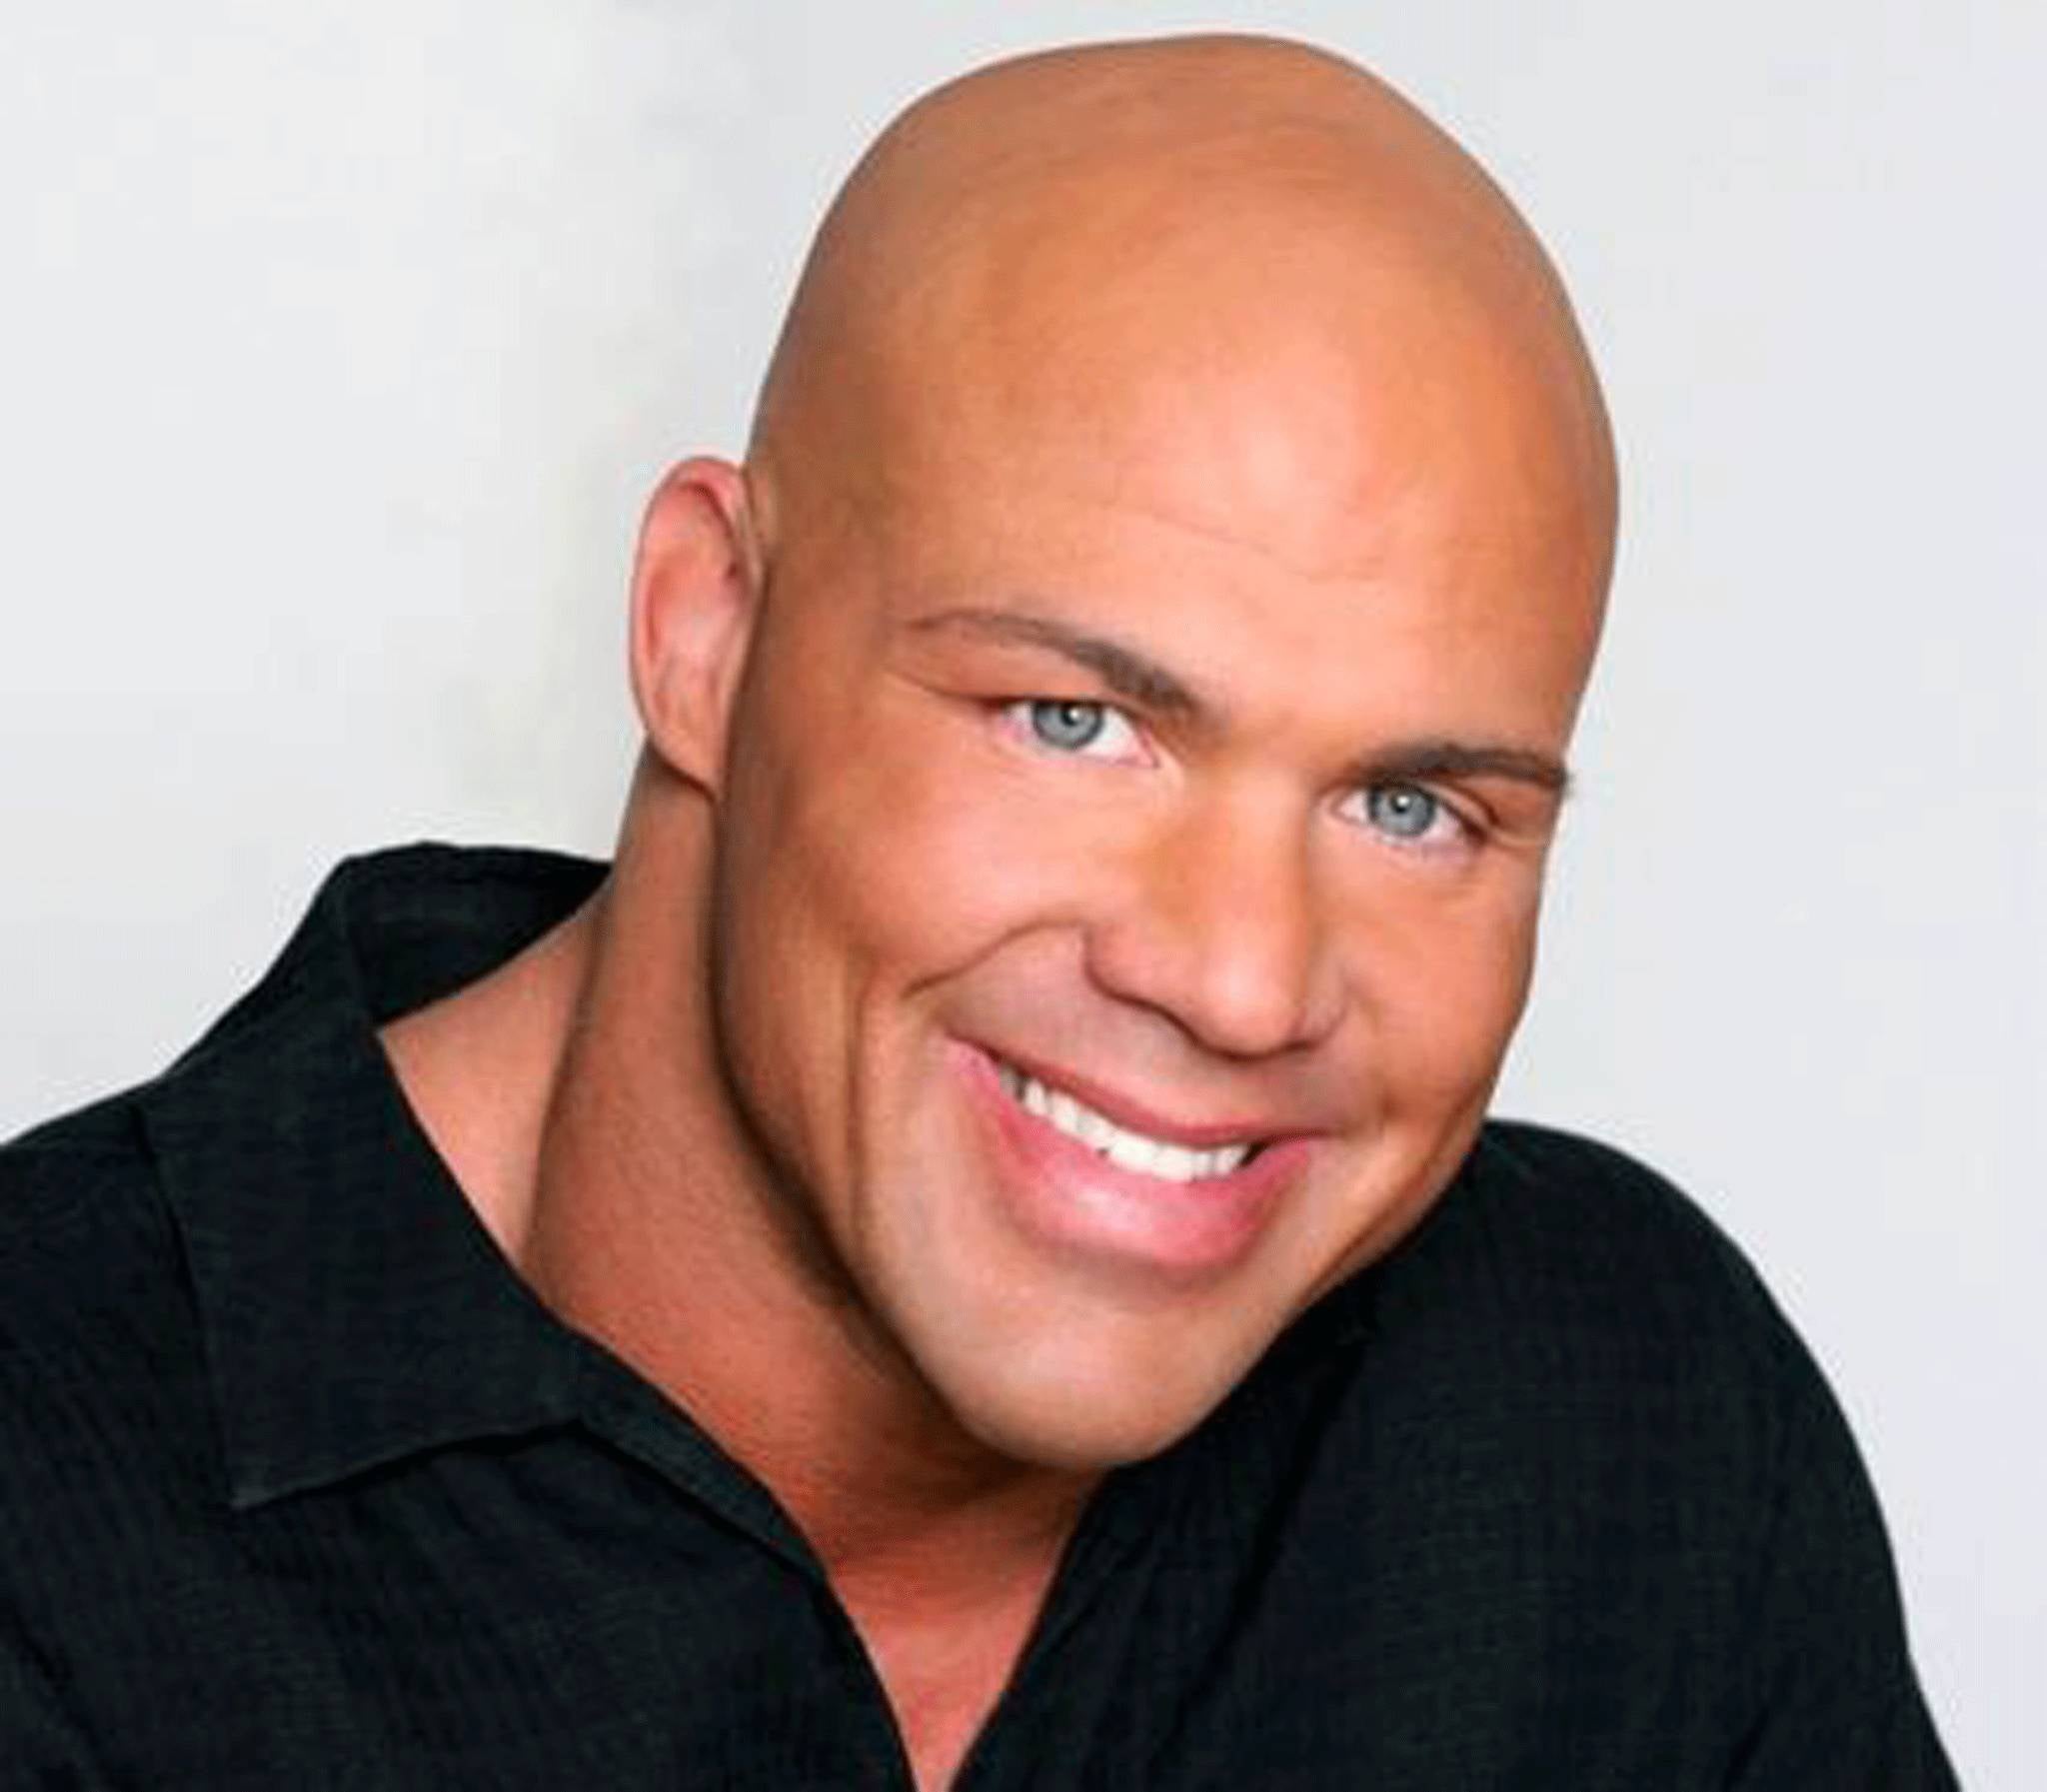 Will Kurt Angle survive the sharkpocalypse? I don't know but look at his gorgeous shiny head